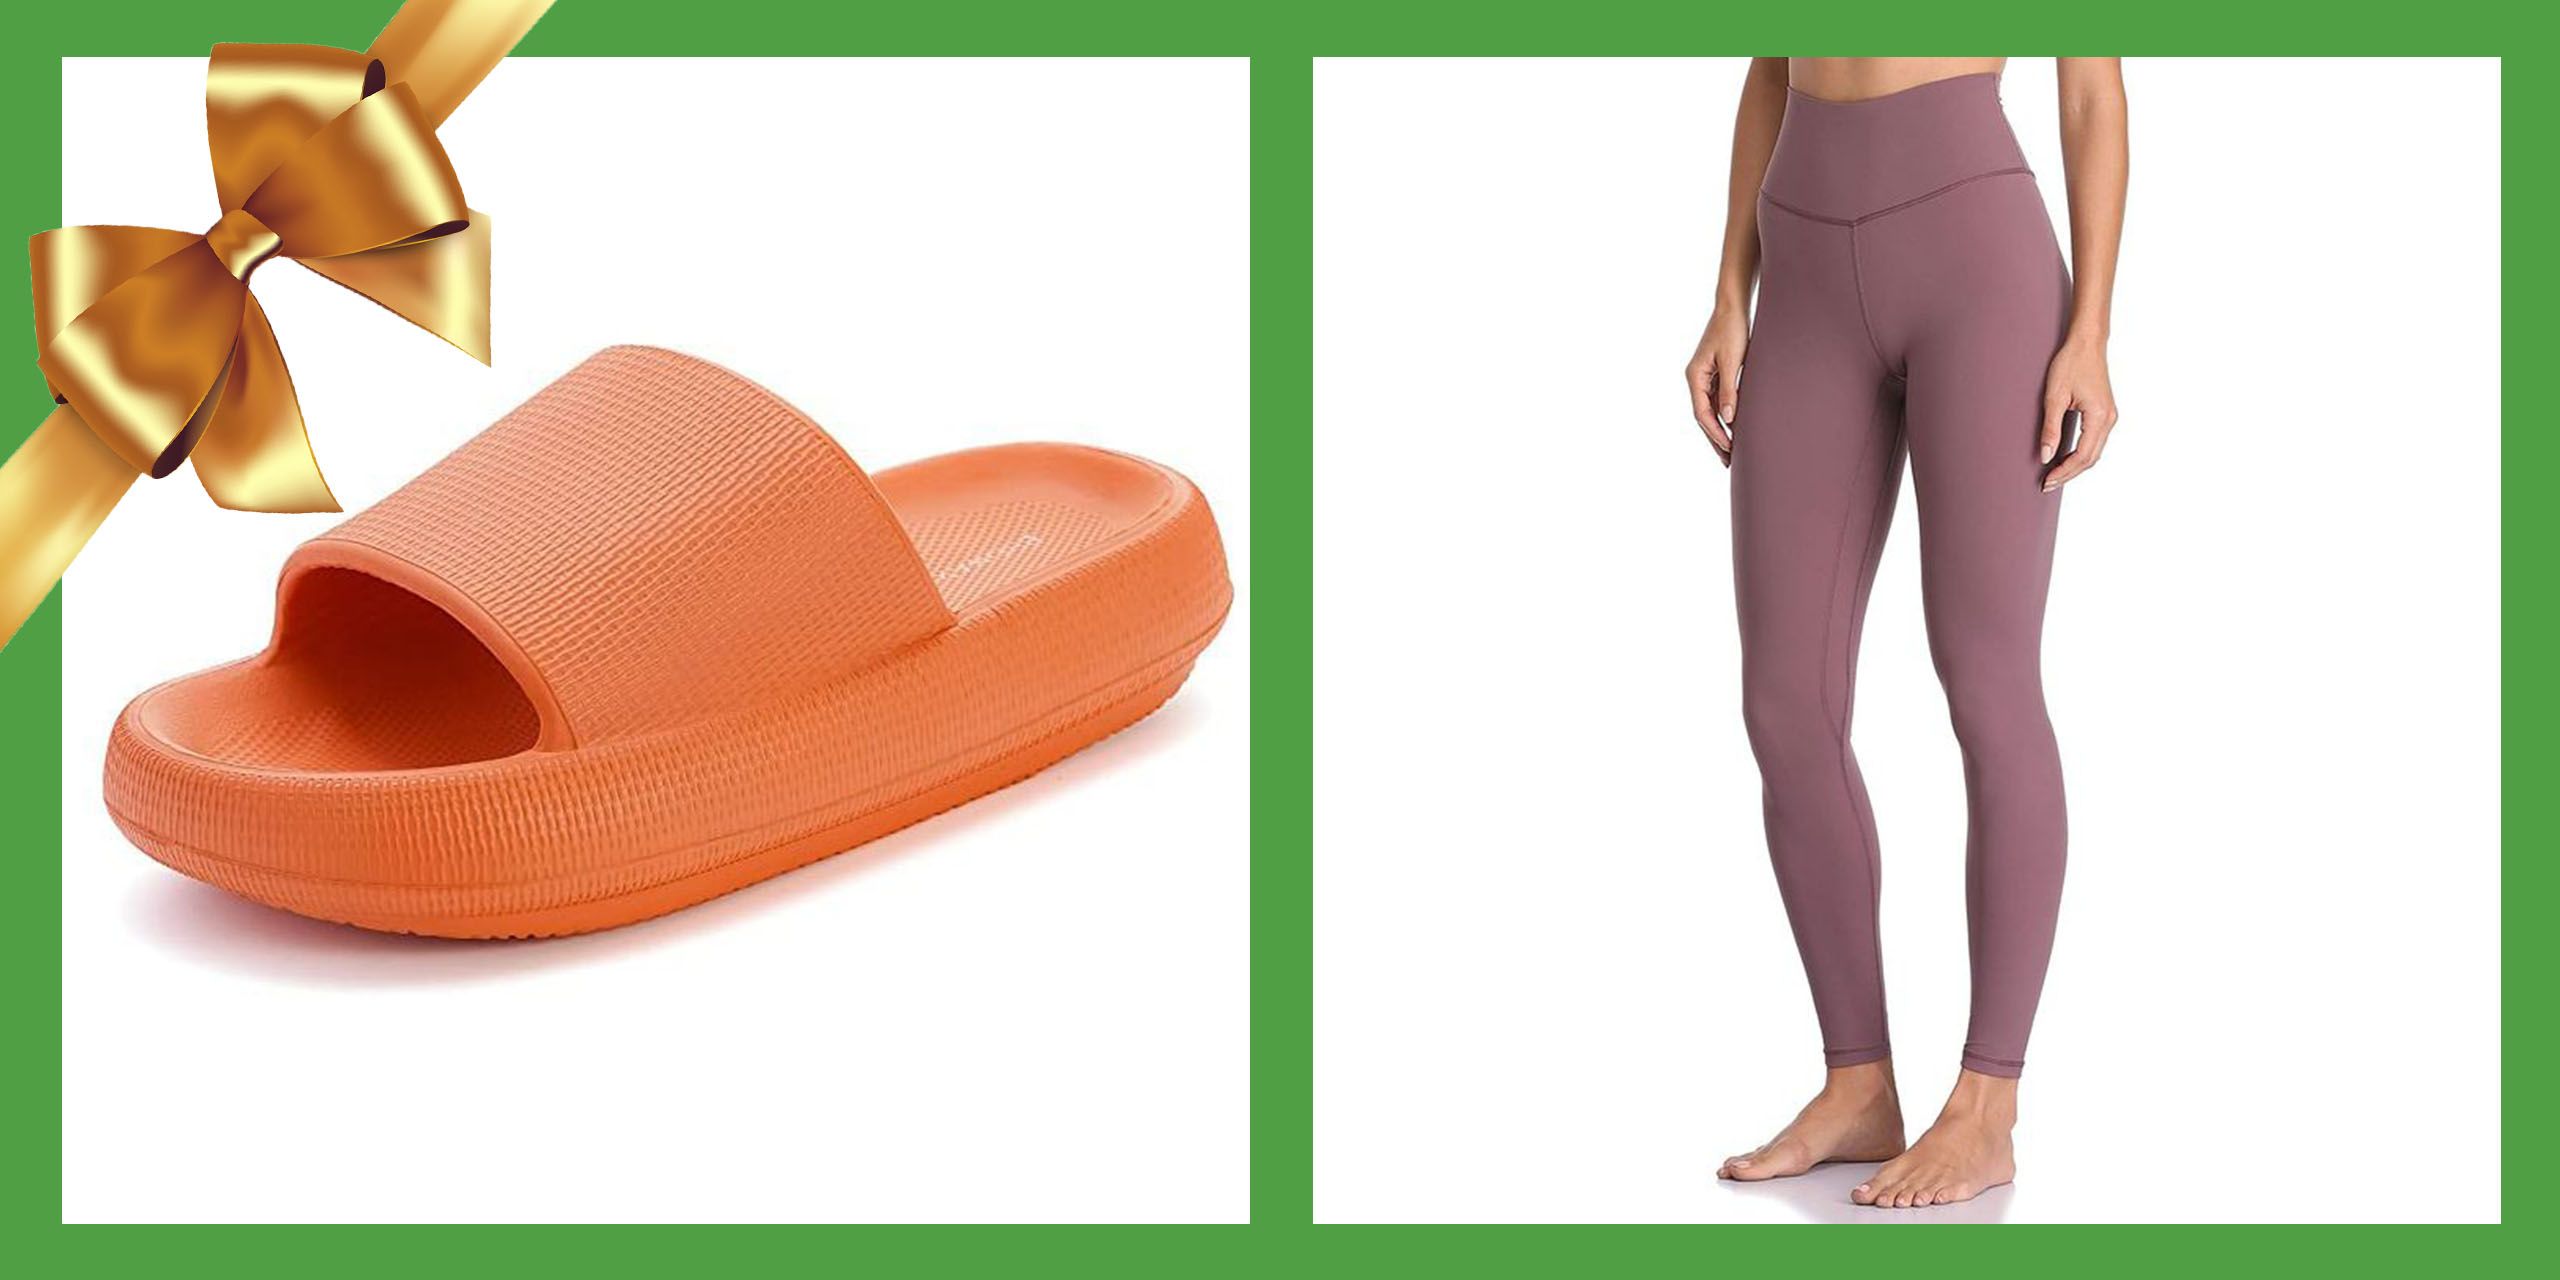 27 Fitness Gift Ideas for Athletic Teen Girls